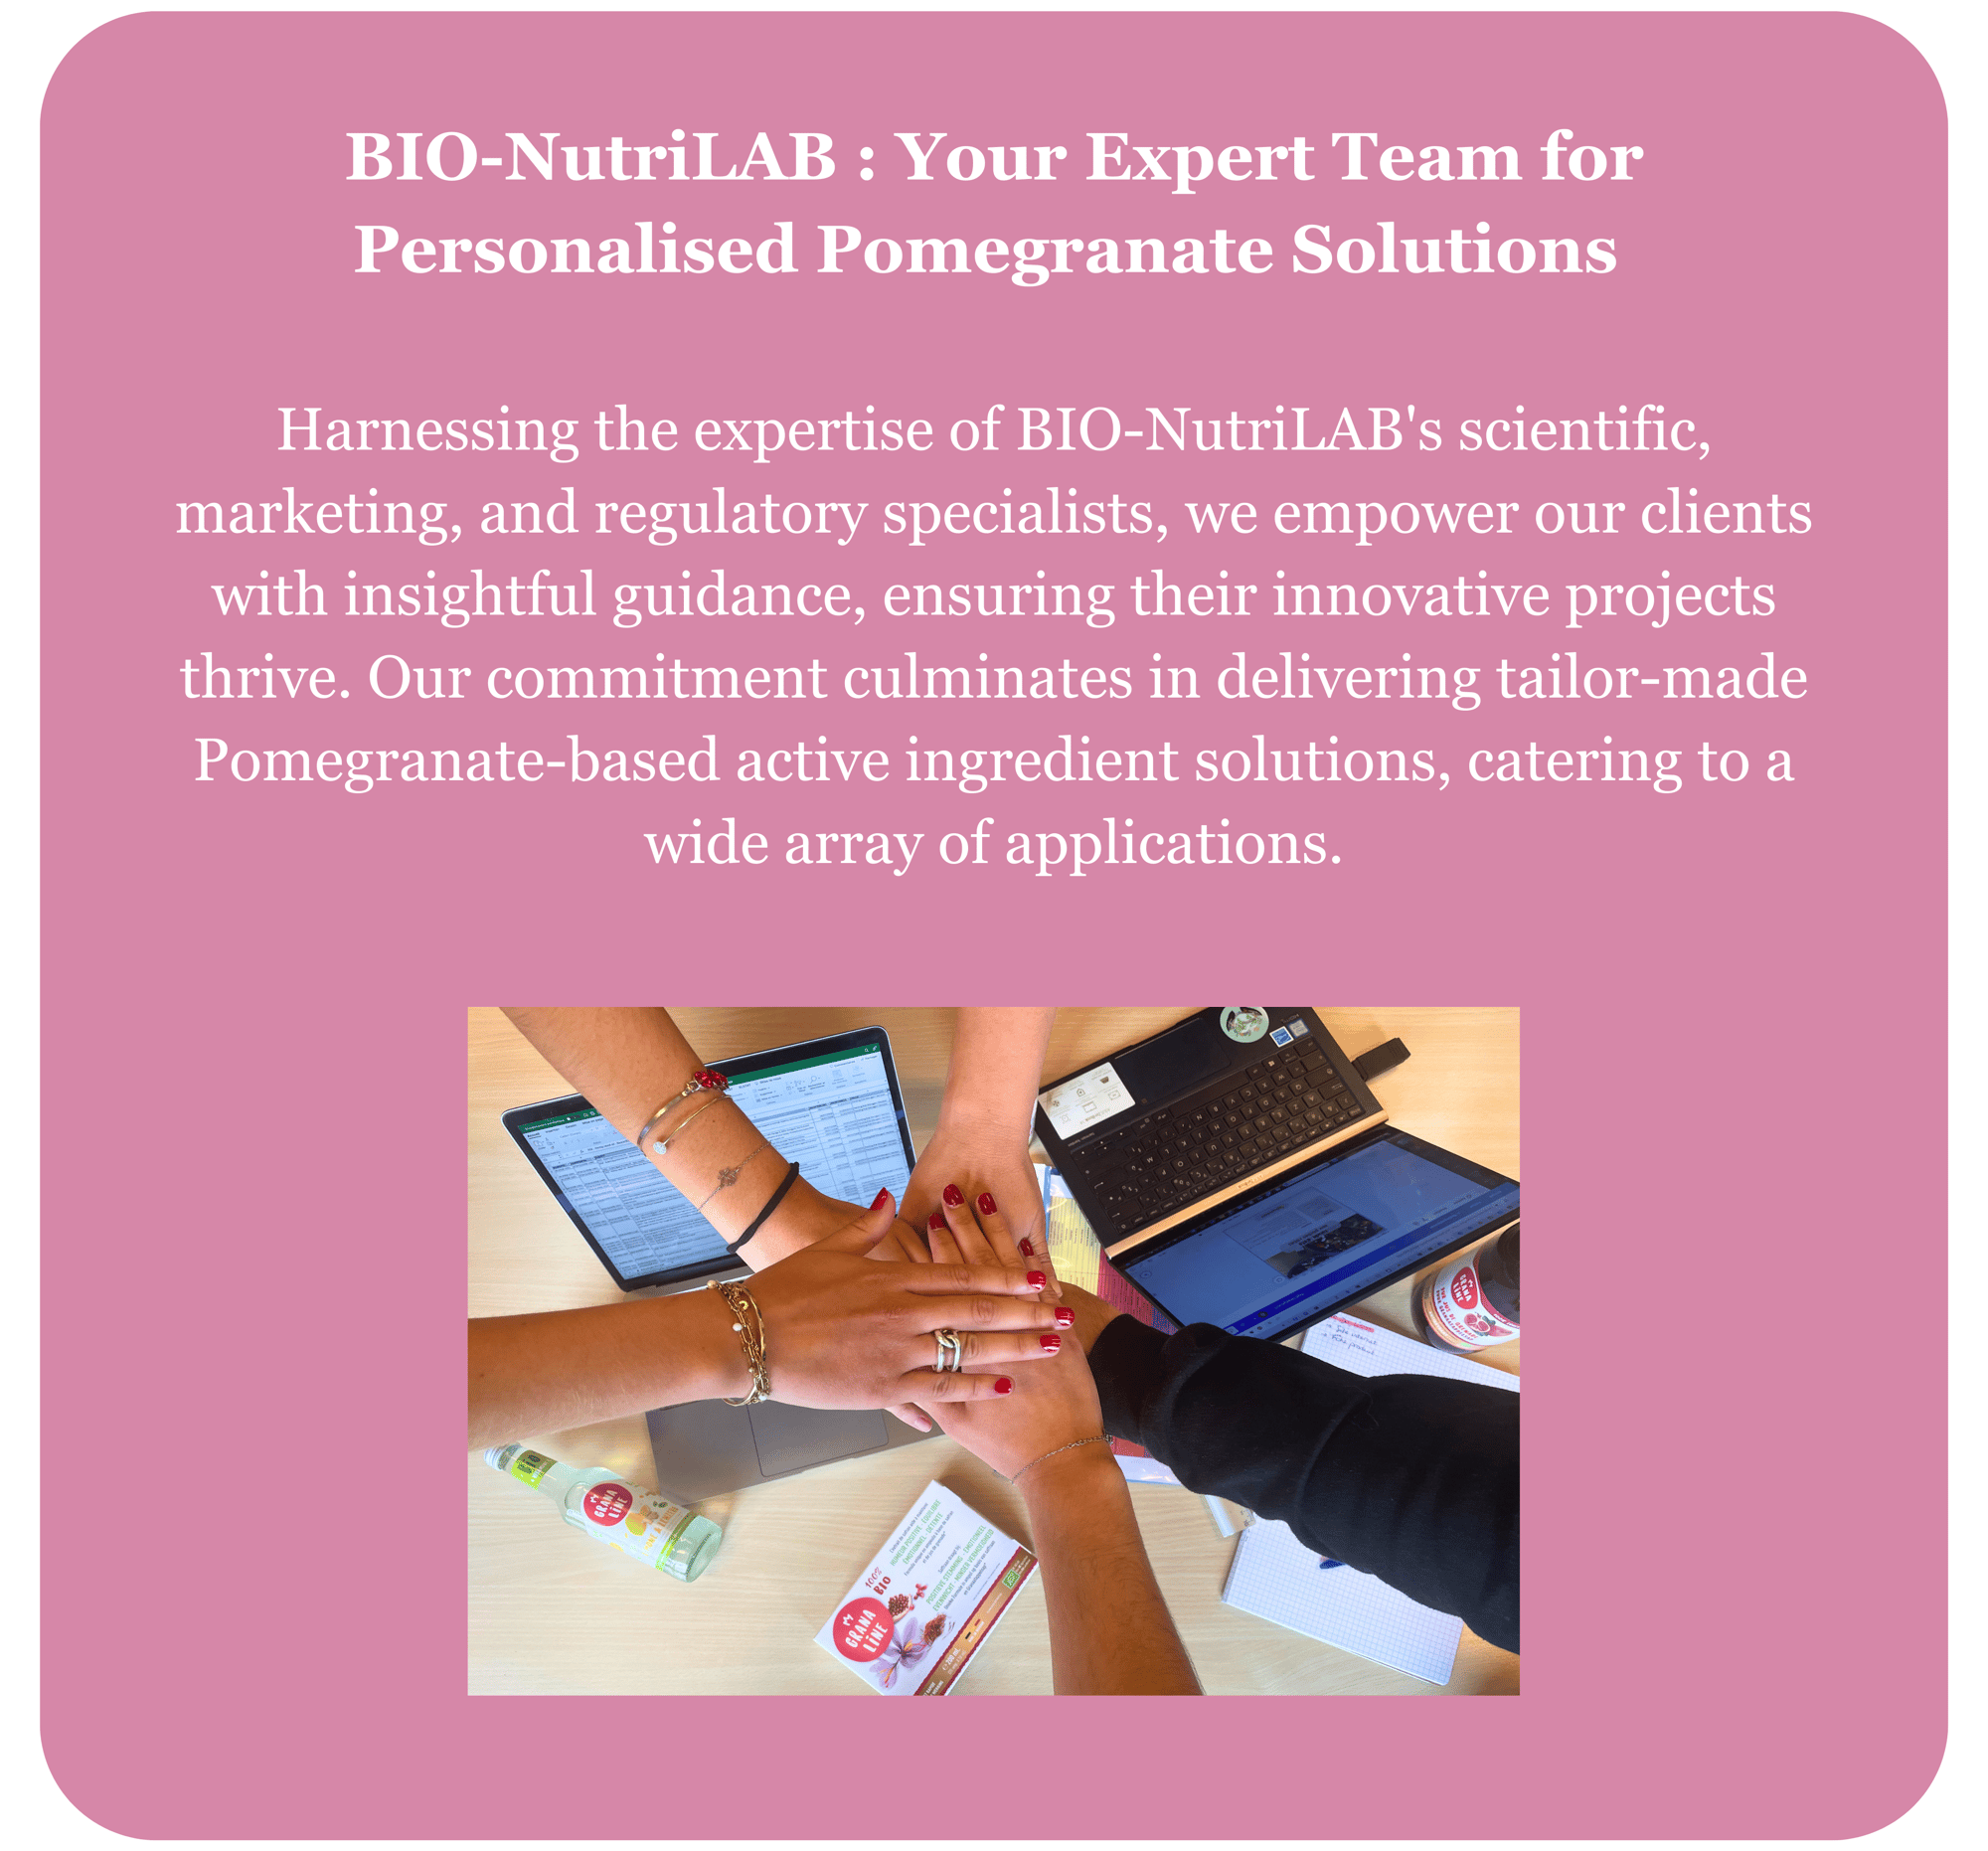 BIO-NutriLAB  Your Expert Team for Personalised Pomegranate Solutions